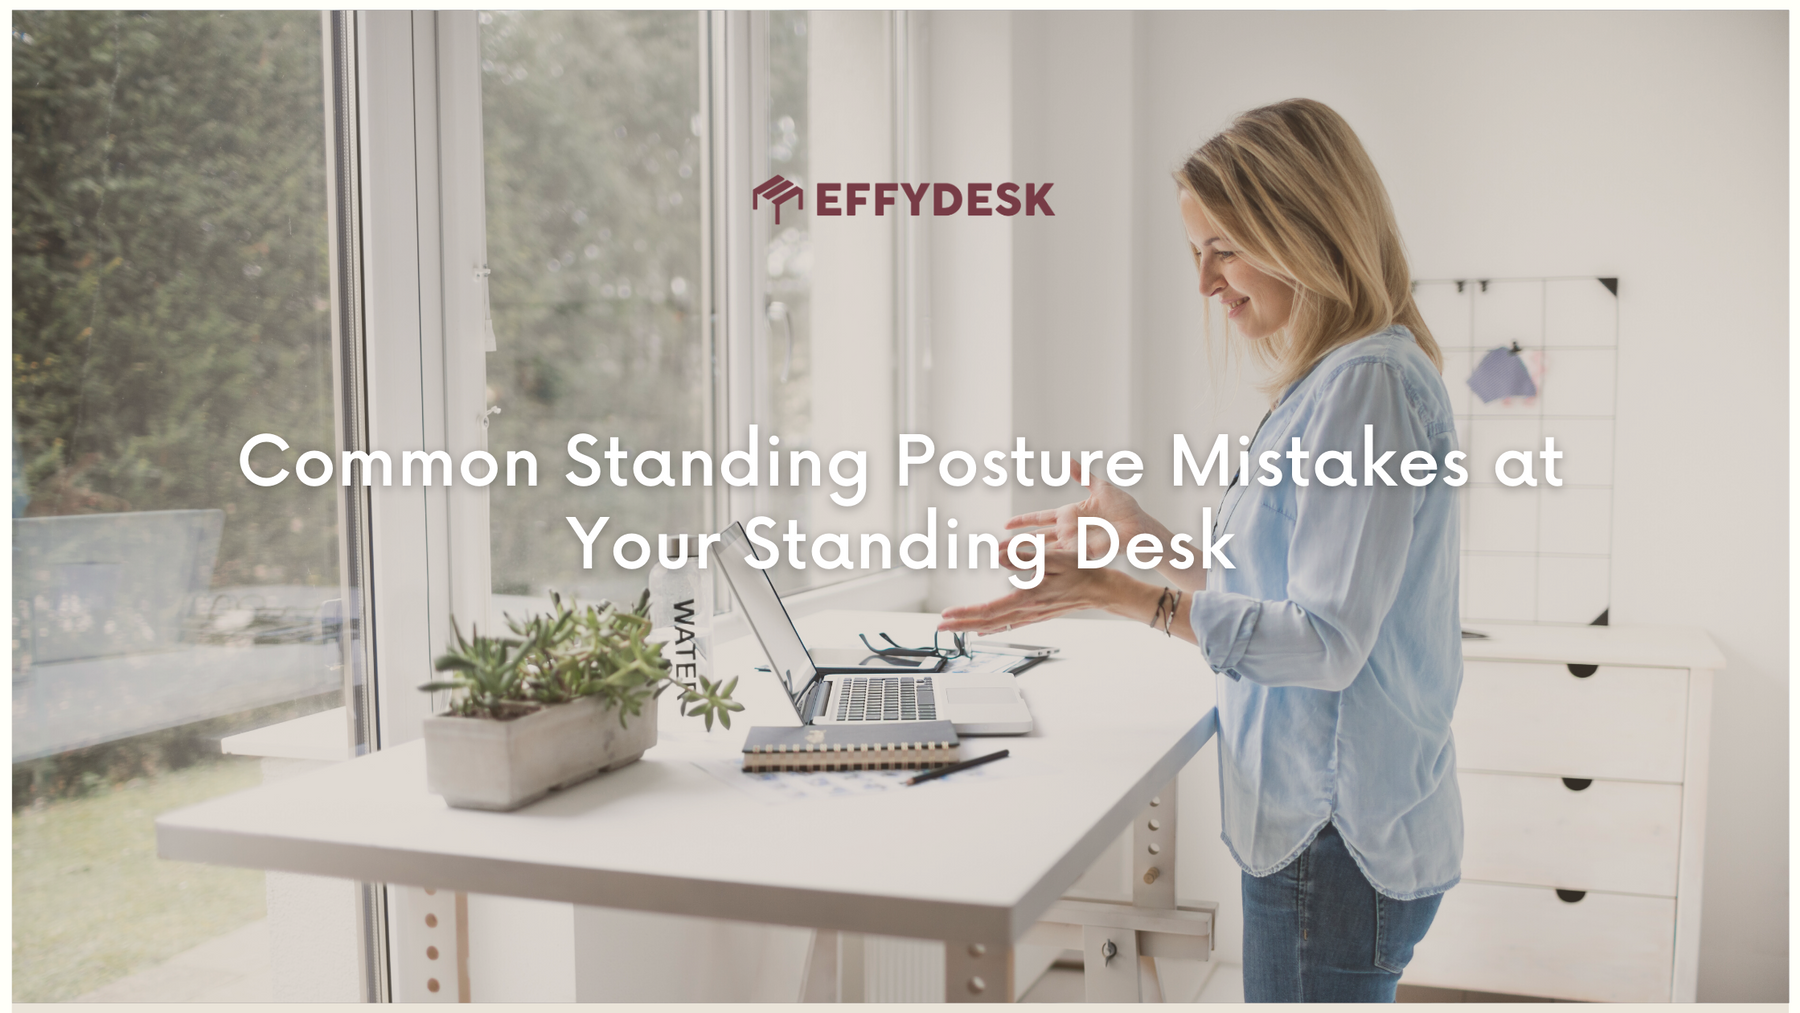 Common Standing Posture Mistakes at Your Standing Desk